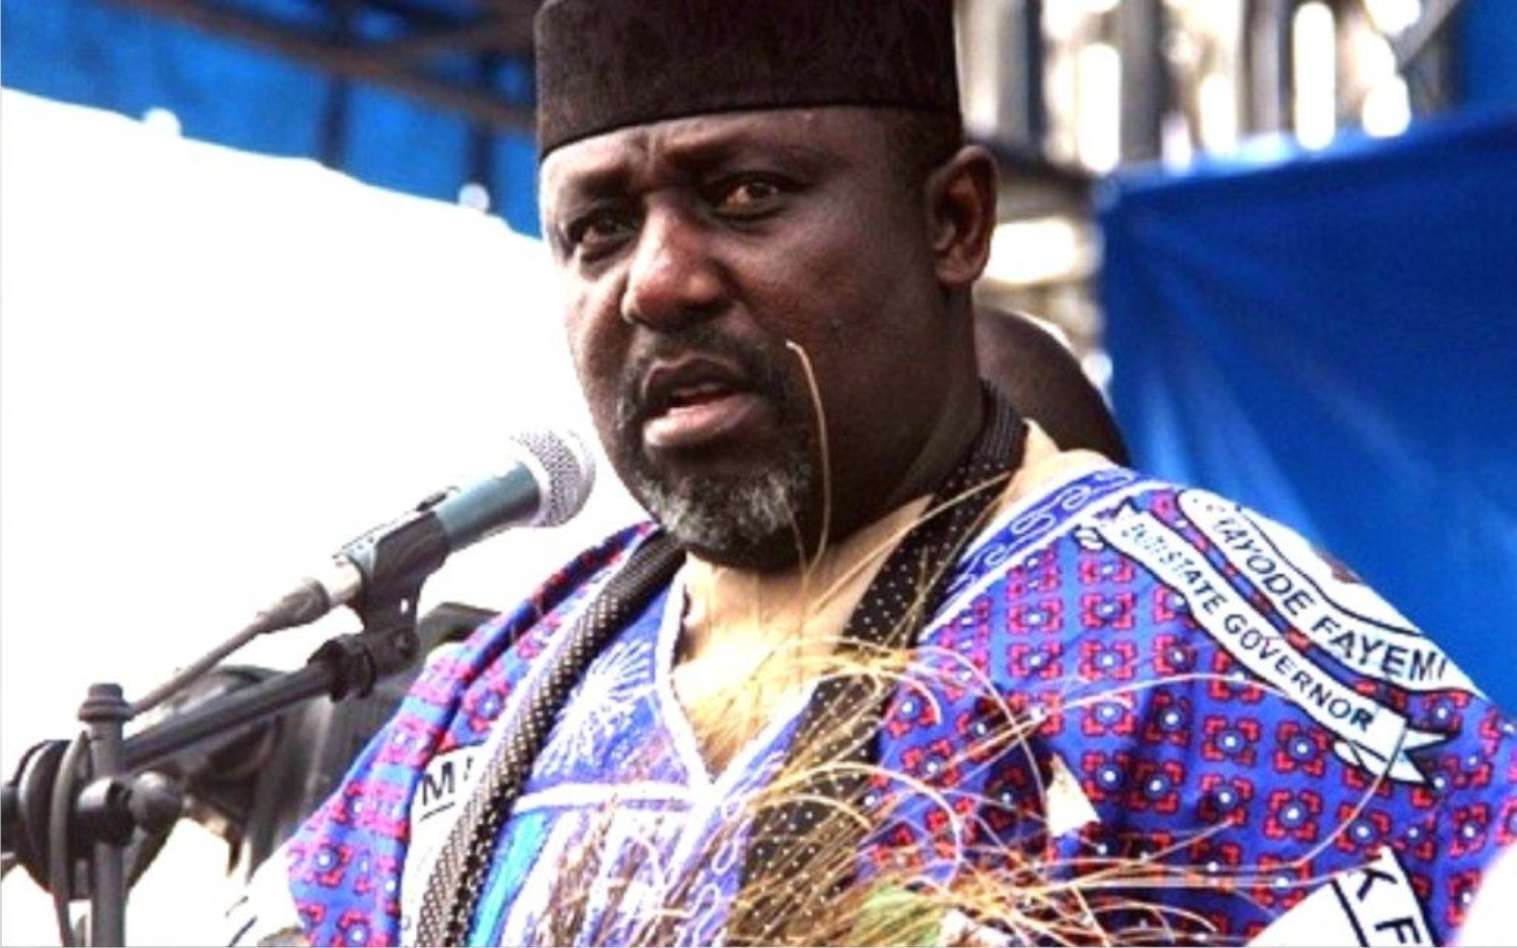 Okorocha Forcibly Took People’s Land In Imo, Converted Same To Personal Property As Governor – IPOB